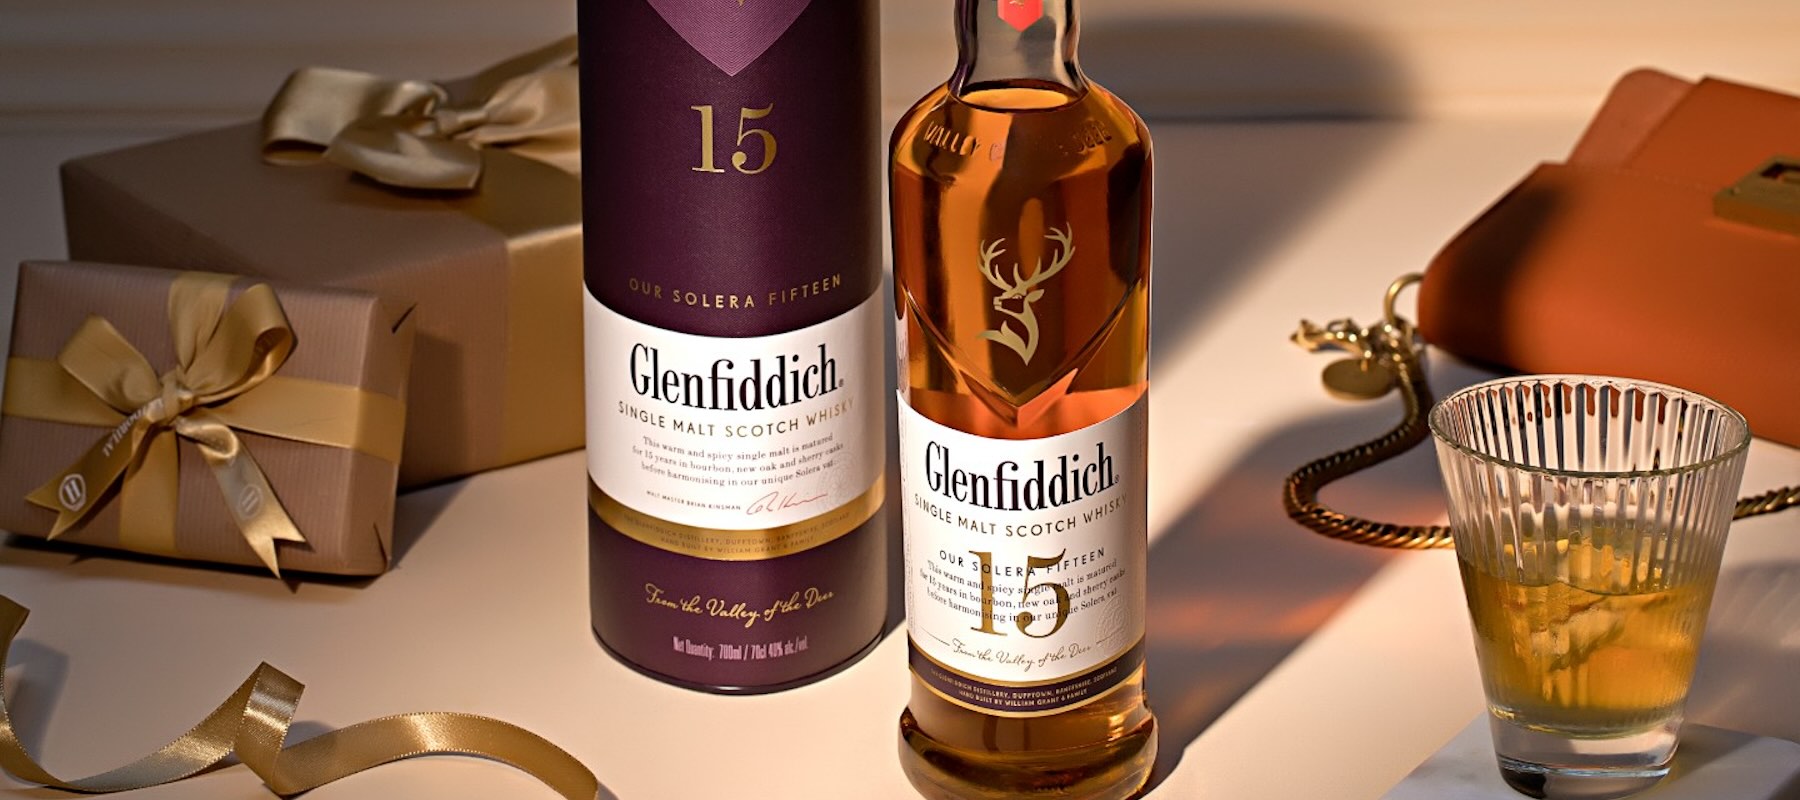 Whisky Under £50 Review: Glenfiddich 15 Year Old